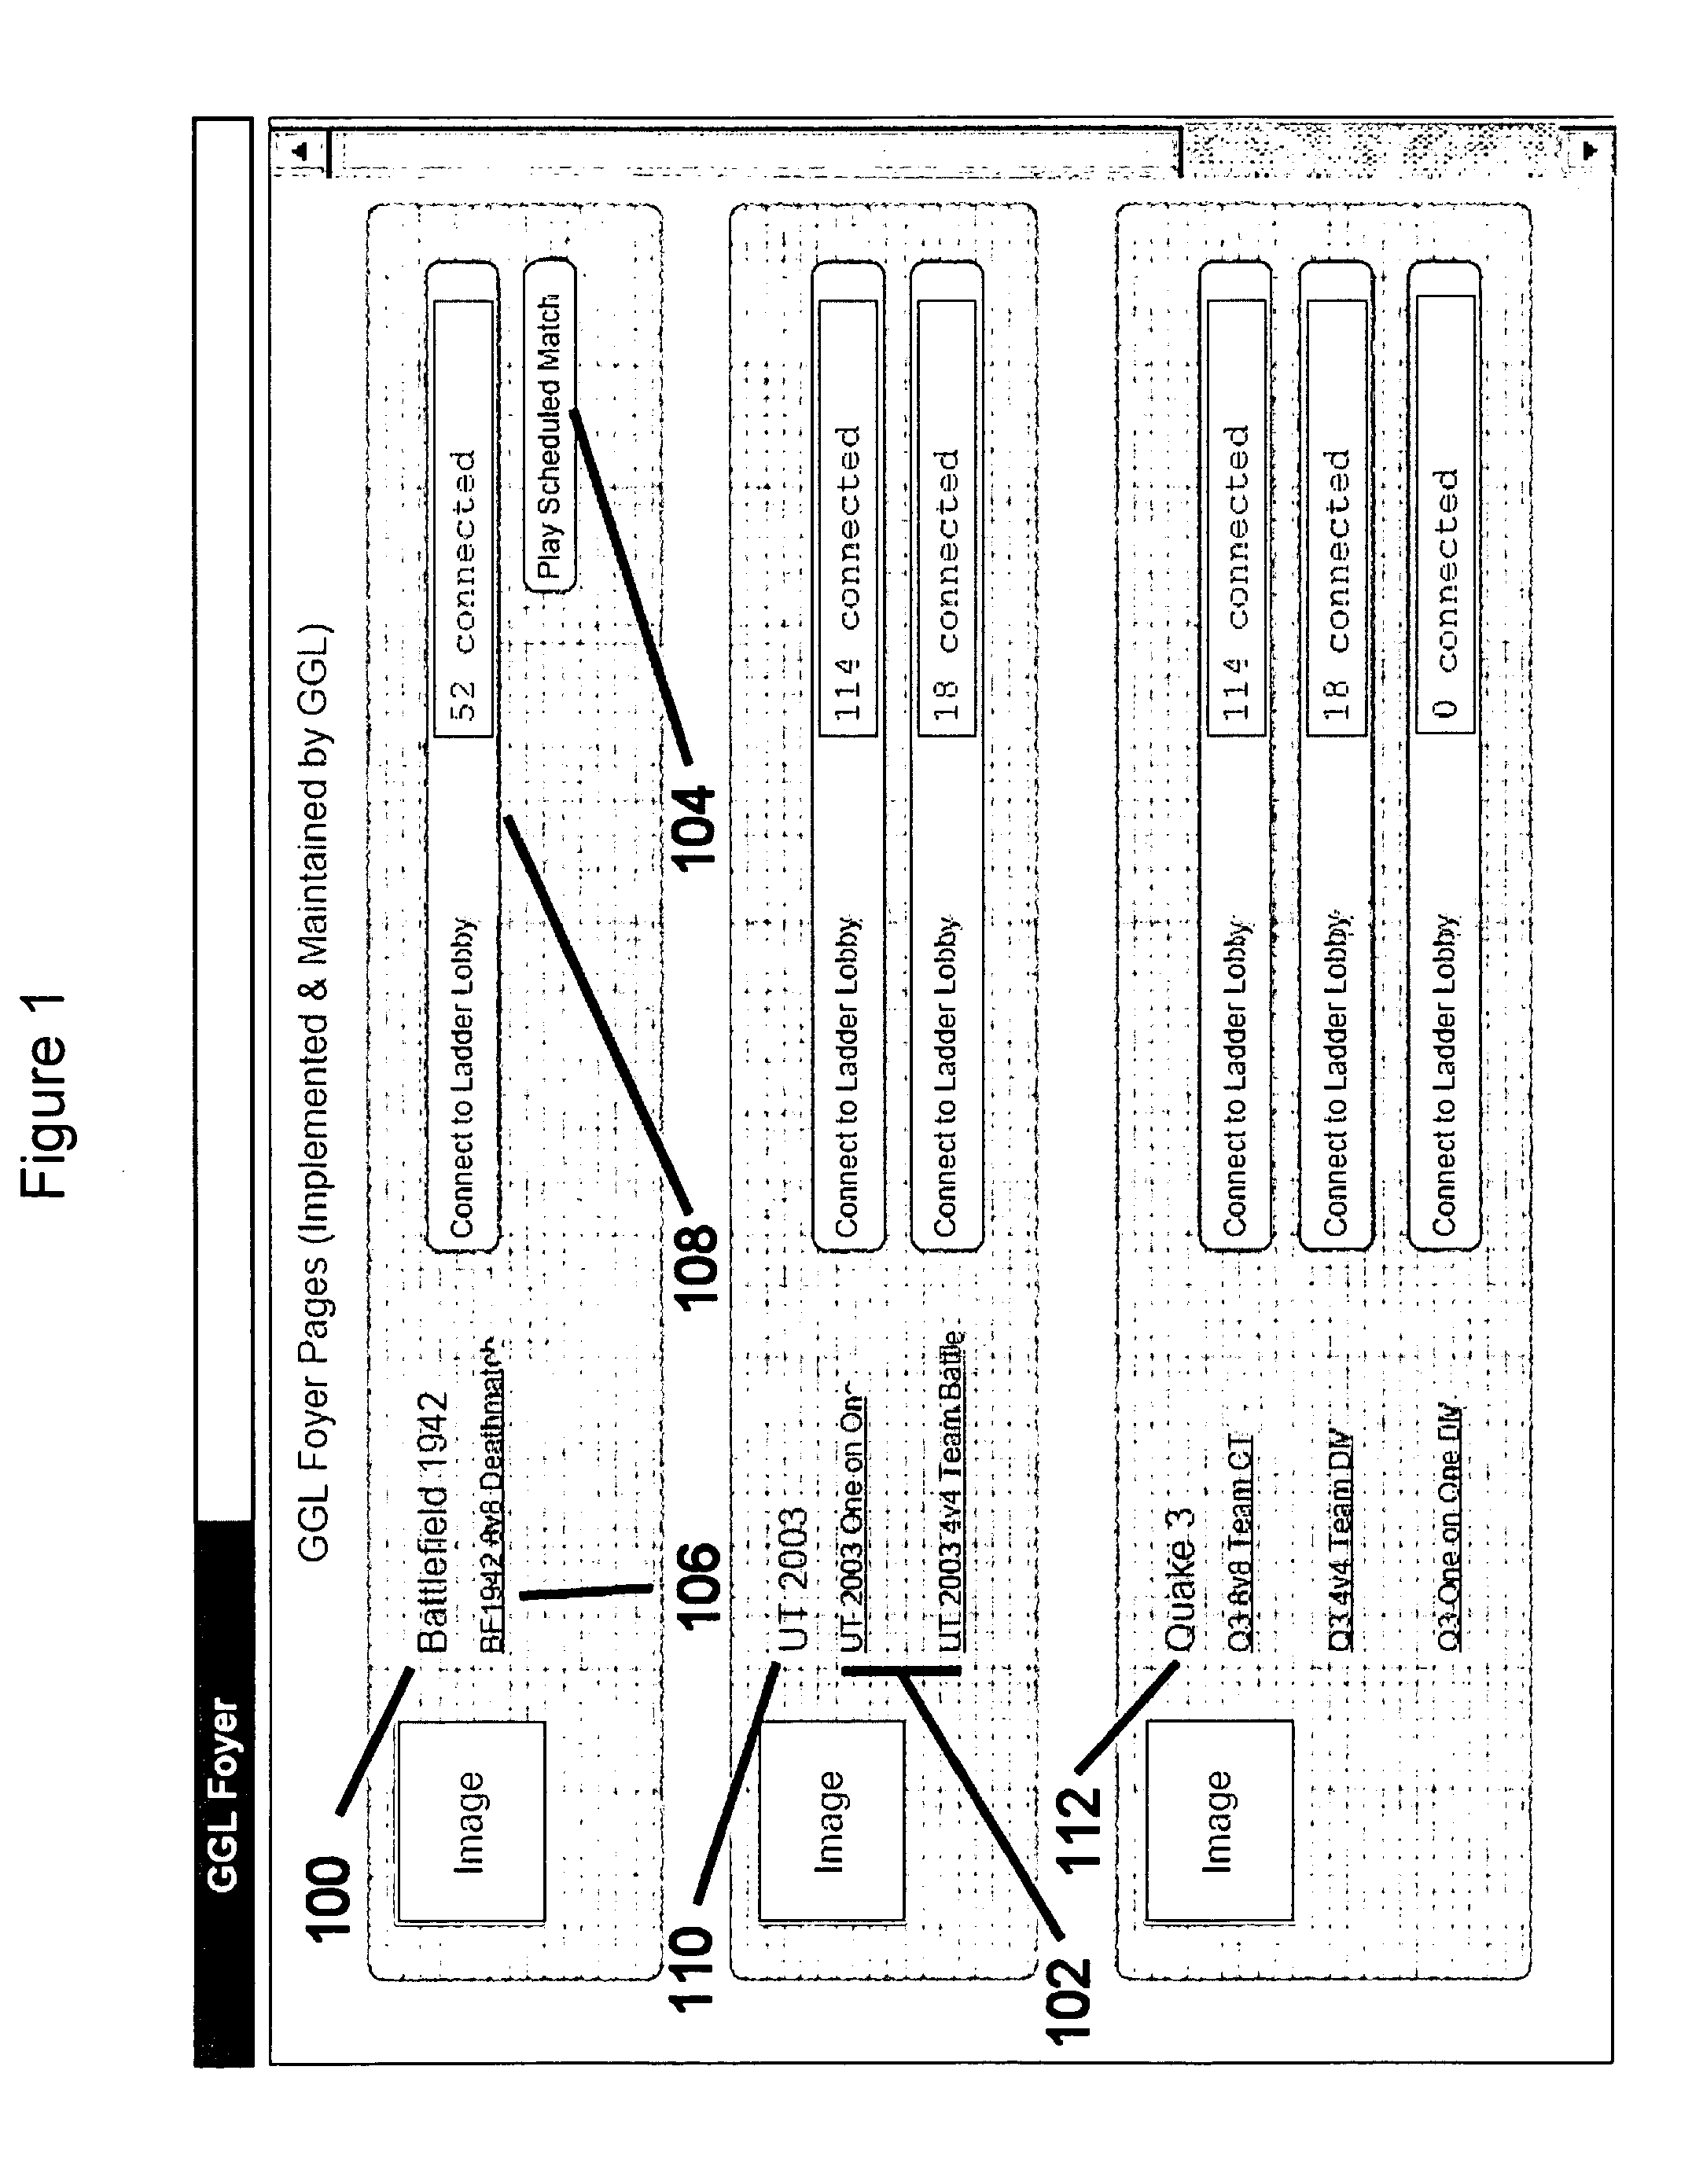 System and method for network interactive game match-up and server selection